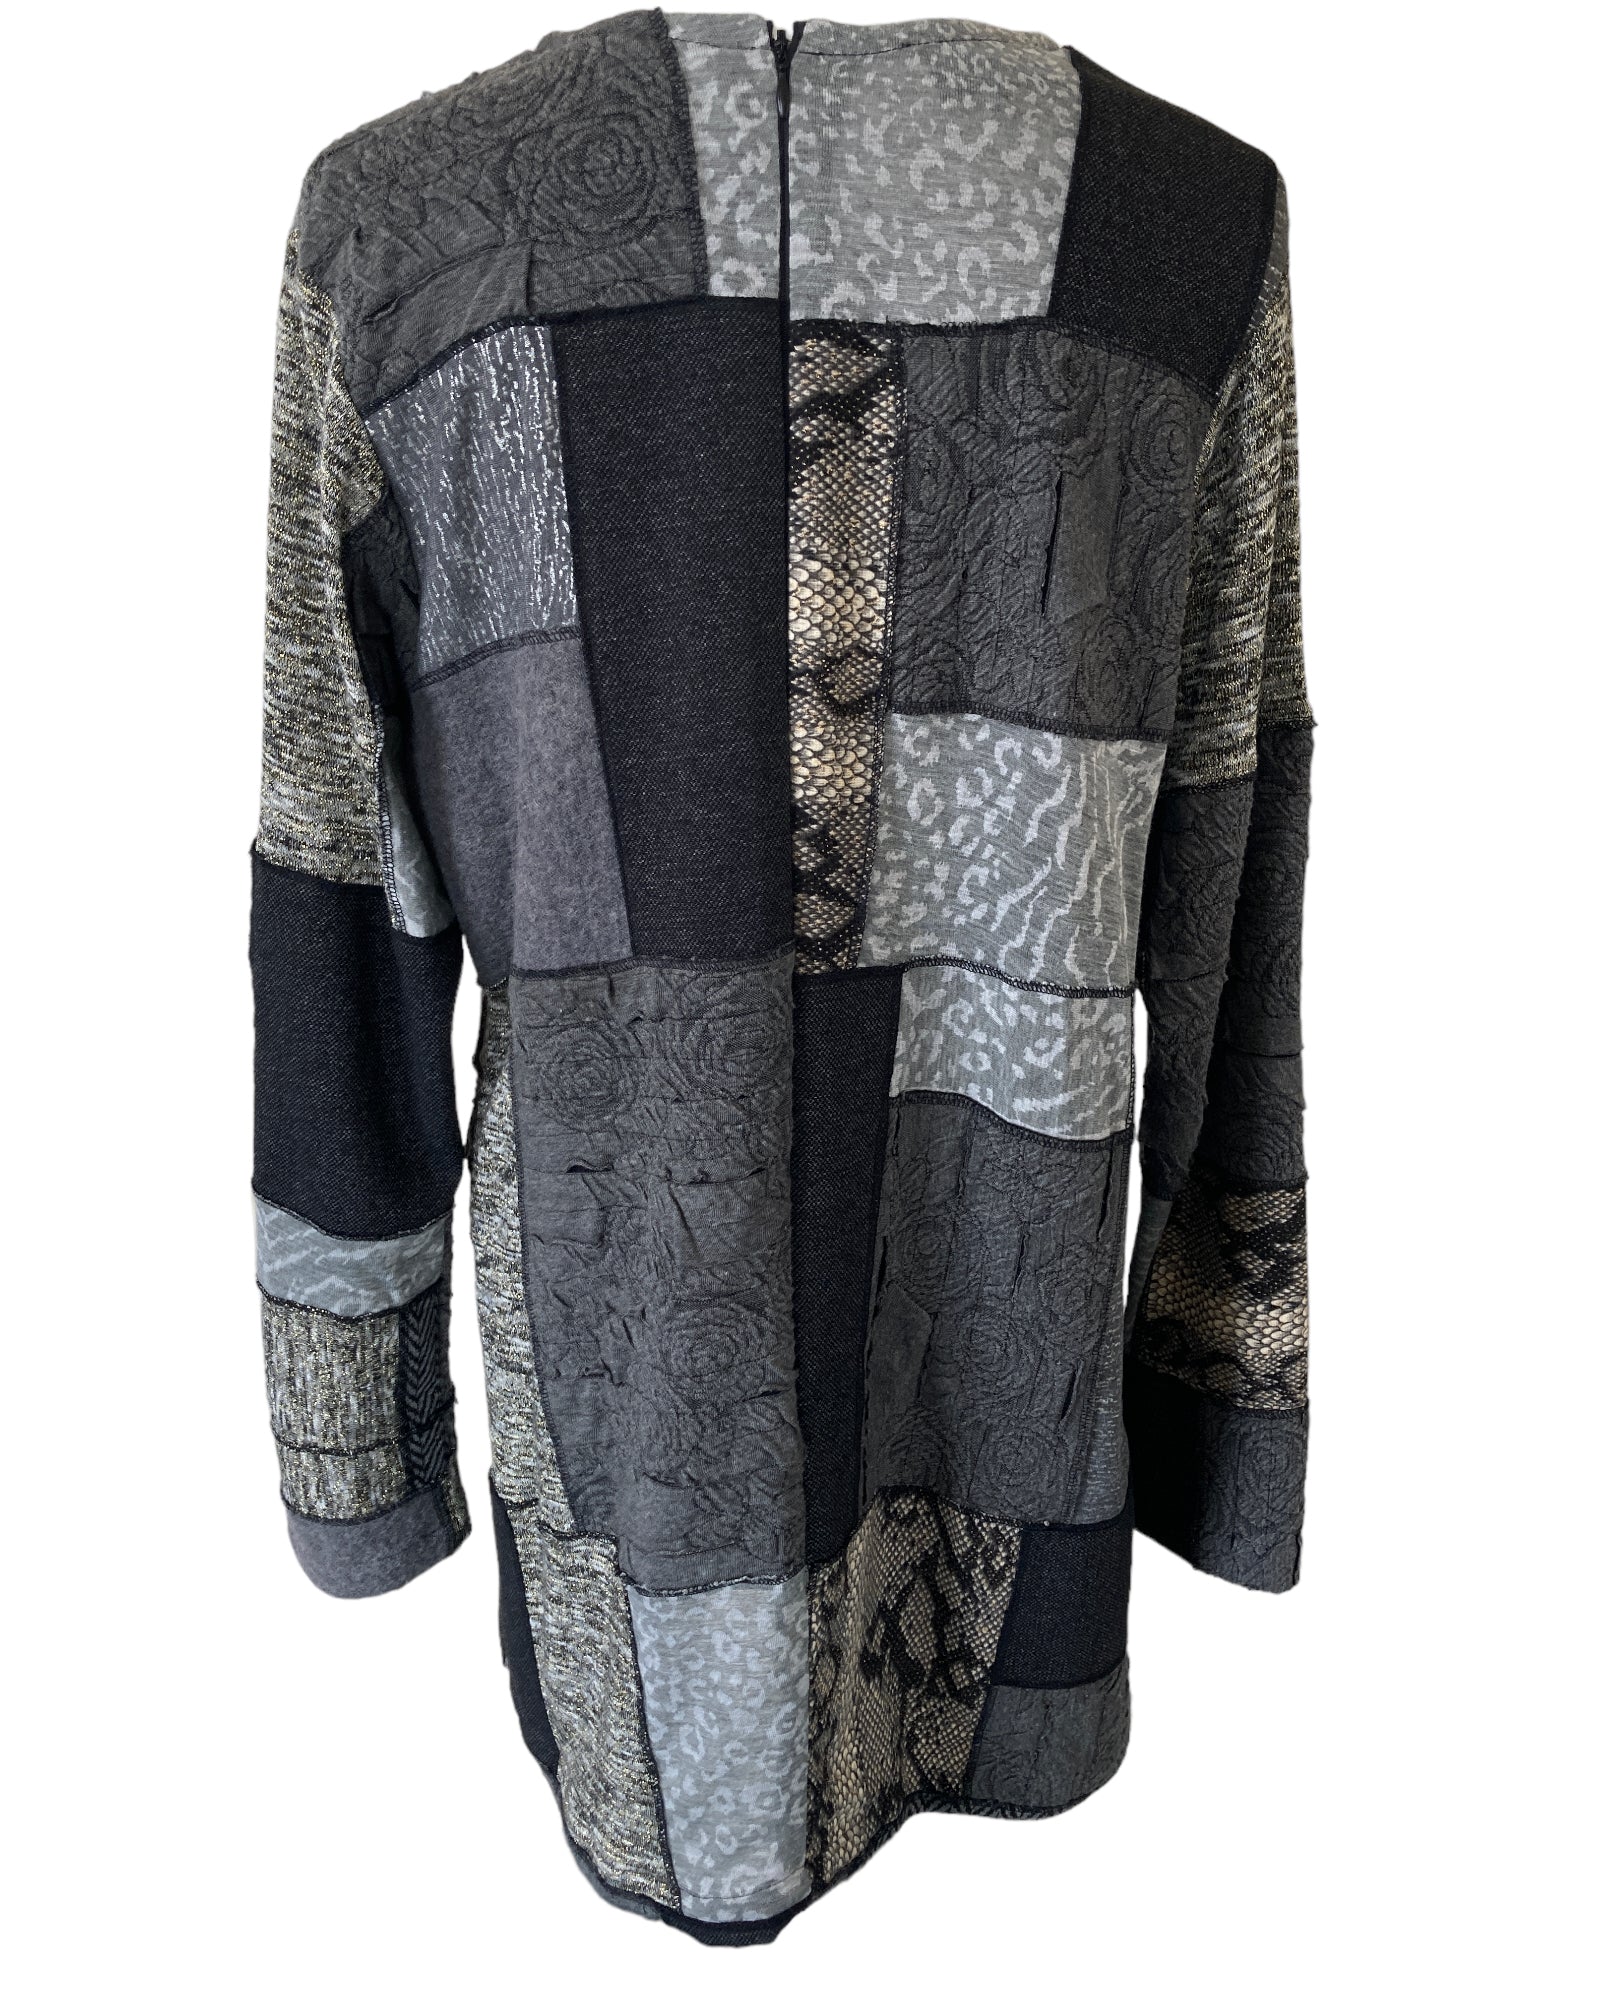 Lili Butler Grey Patchwork Jersey Tunic/Dress with Separate Cowl Neck Piece, M/L